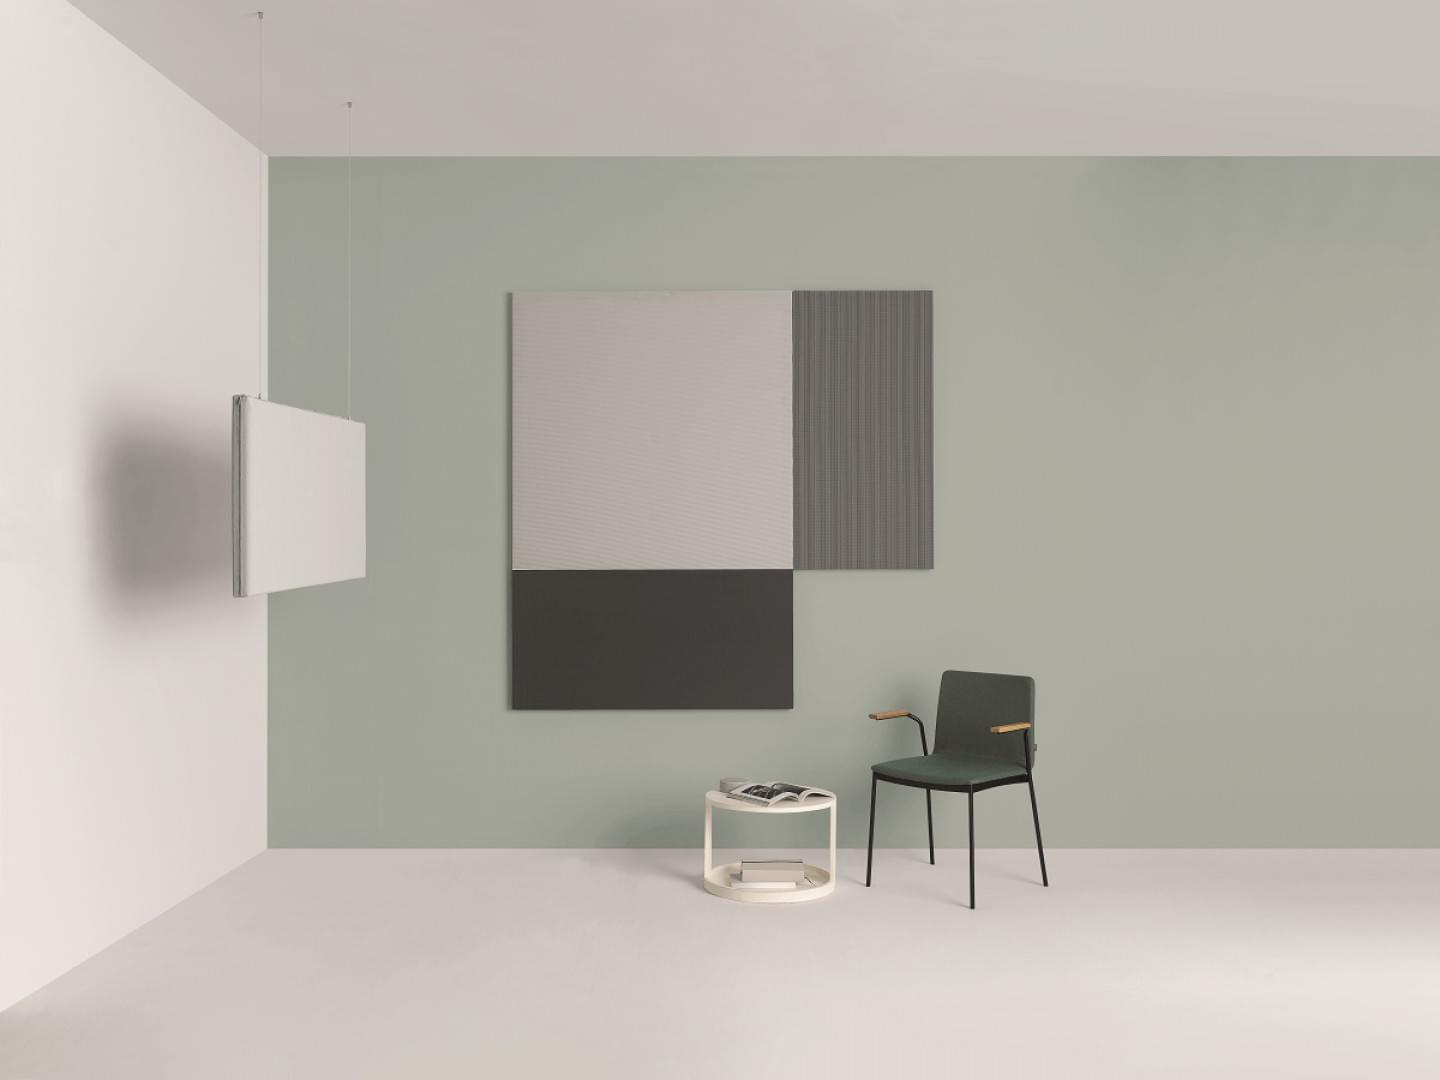 FITNICE LESSEN ACOUSTIC WALL SYSTEM from Jibpool